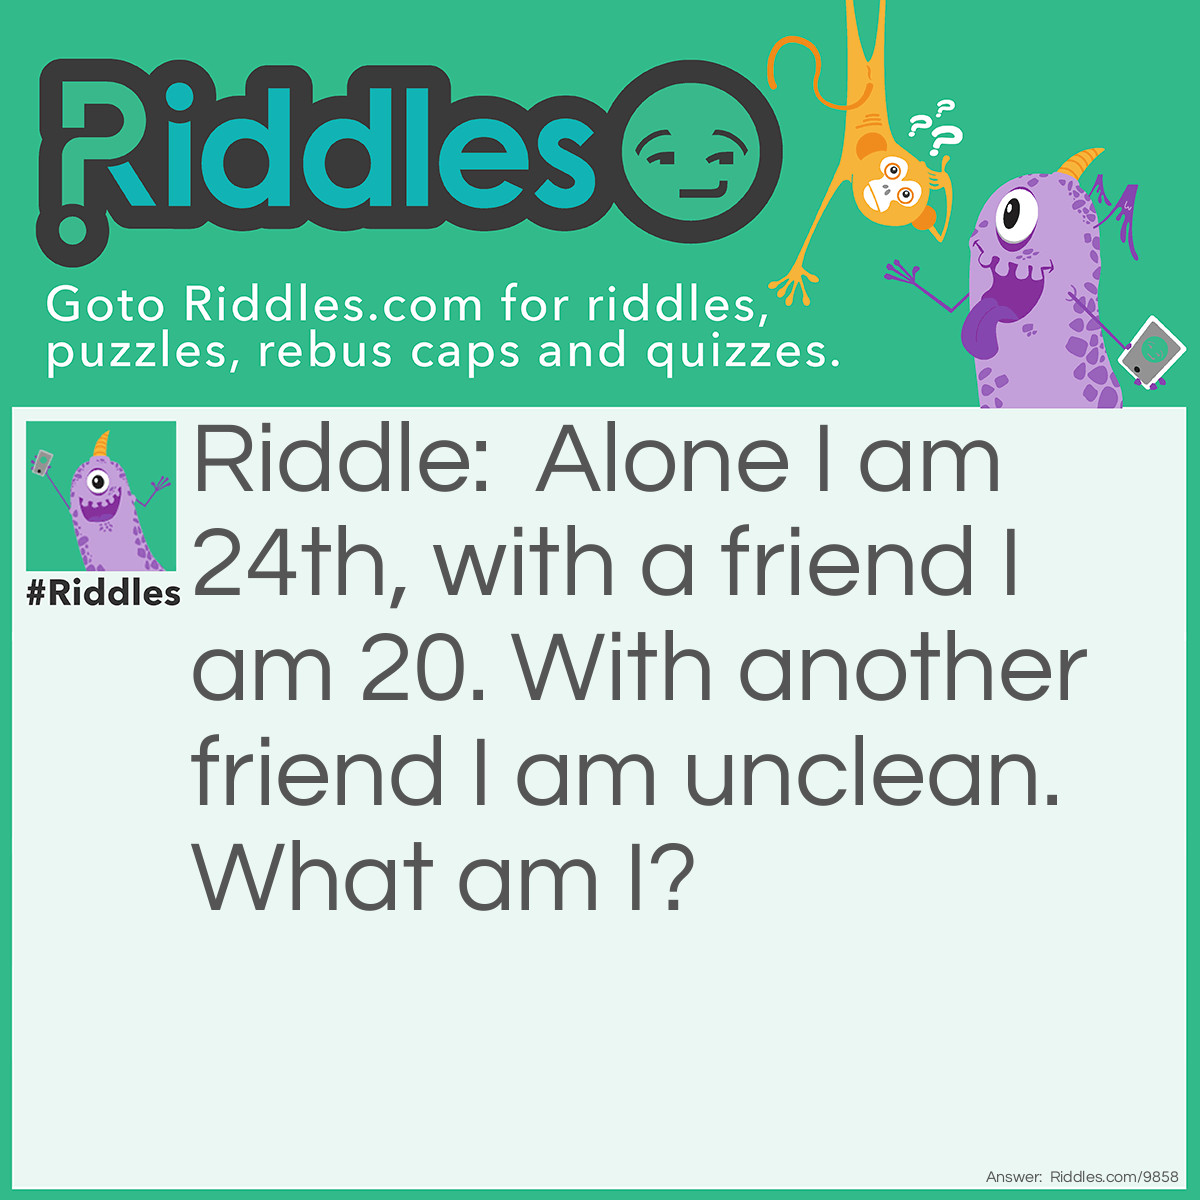 Riddle: Alone I am 24th, with a friend I am 20. With another friend I am unclean. What am I? Answer: I am X. X is the 24th letter of the alphabet, XX is the roman numeral for 20, and XXX is the code for adult films.